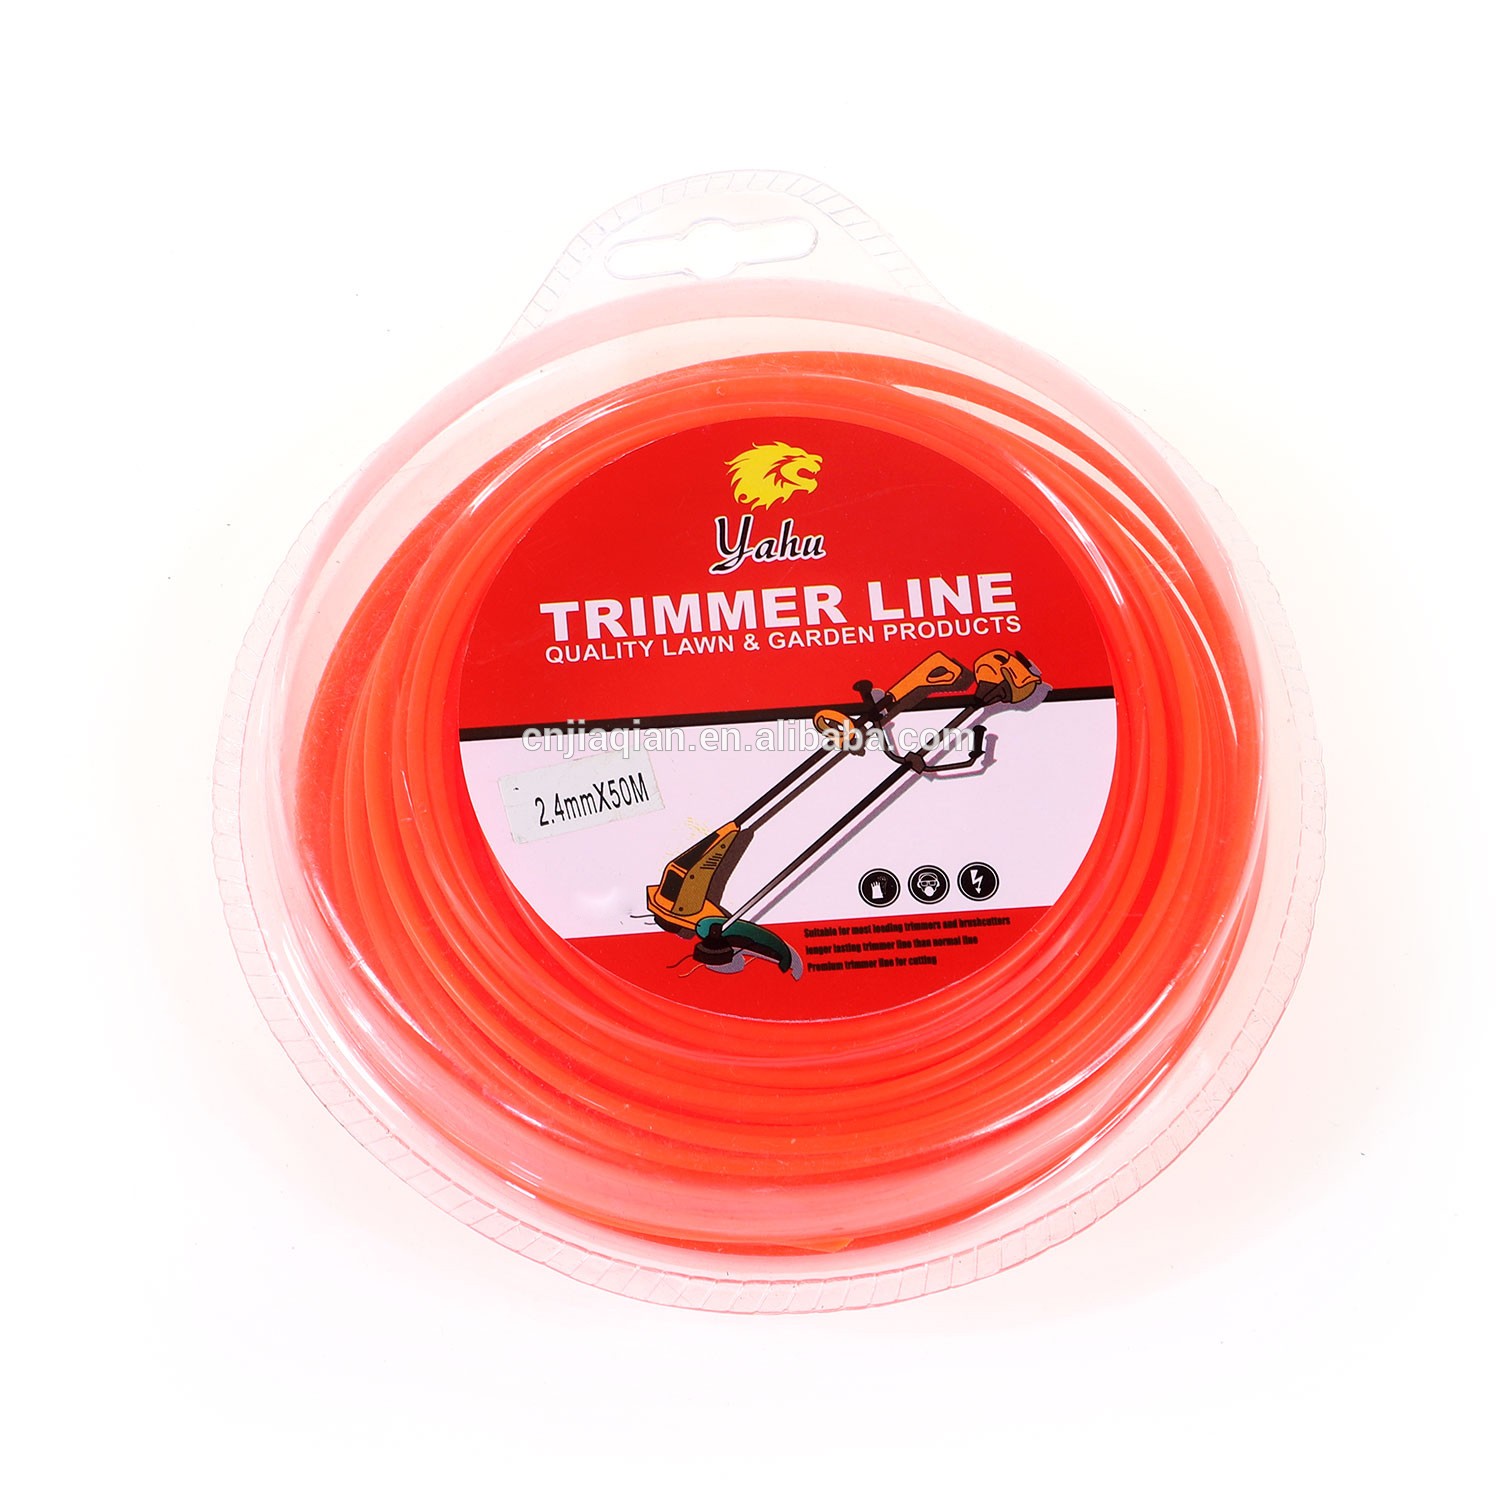 Trimmer head of plastic with fixed nylon trimmer line fits for Stihl brush cutter spare parts for grass cutter